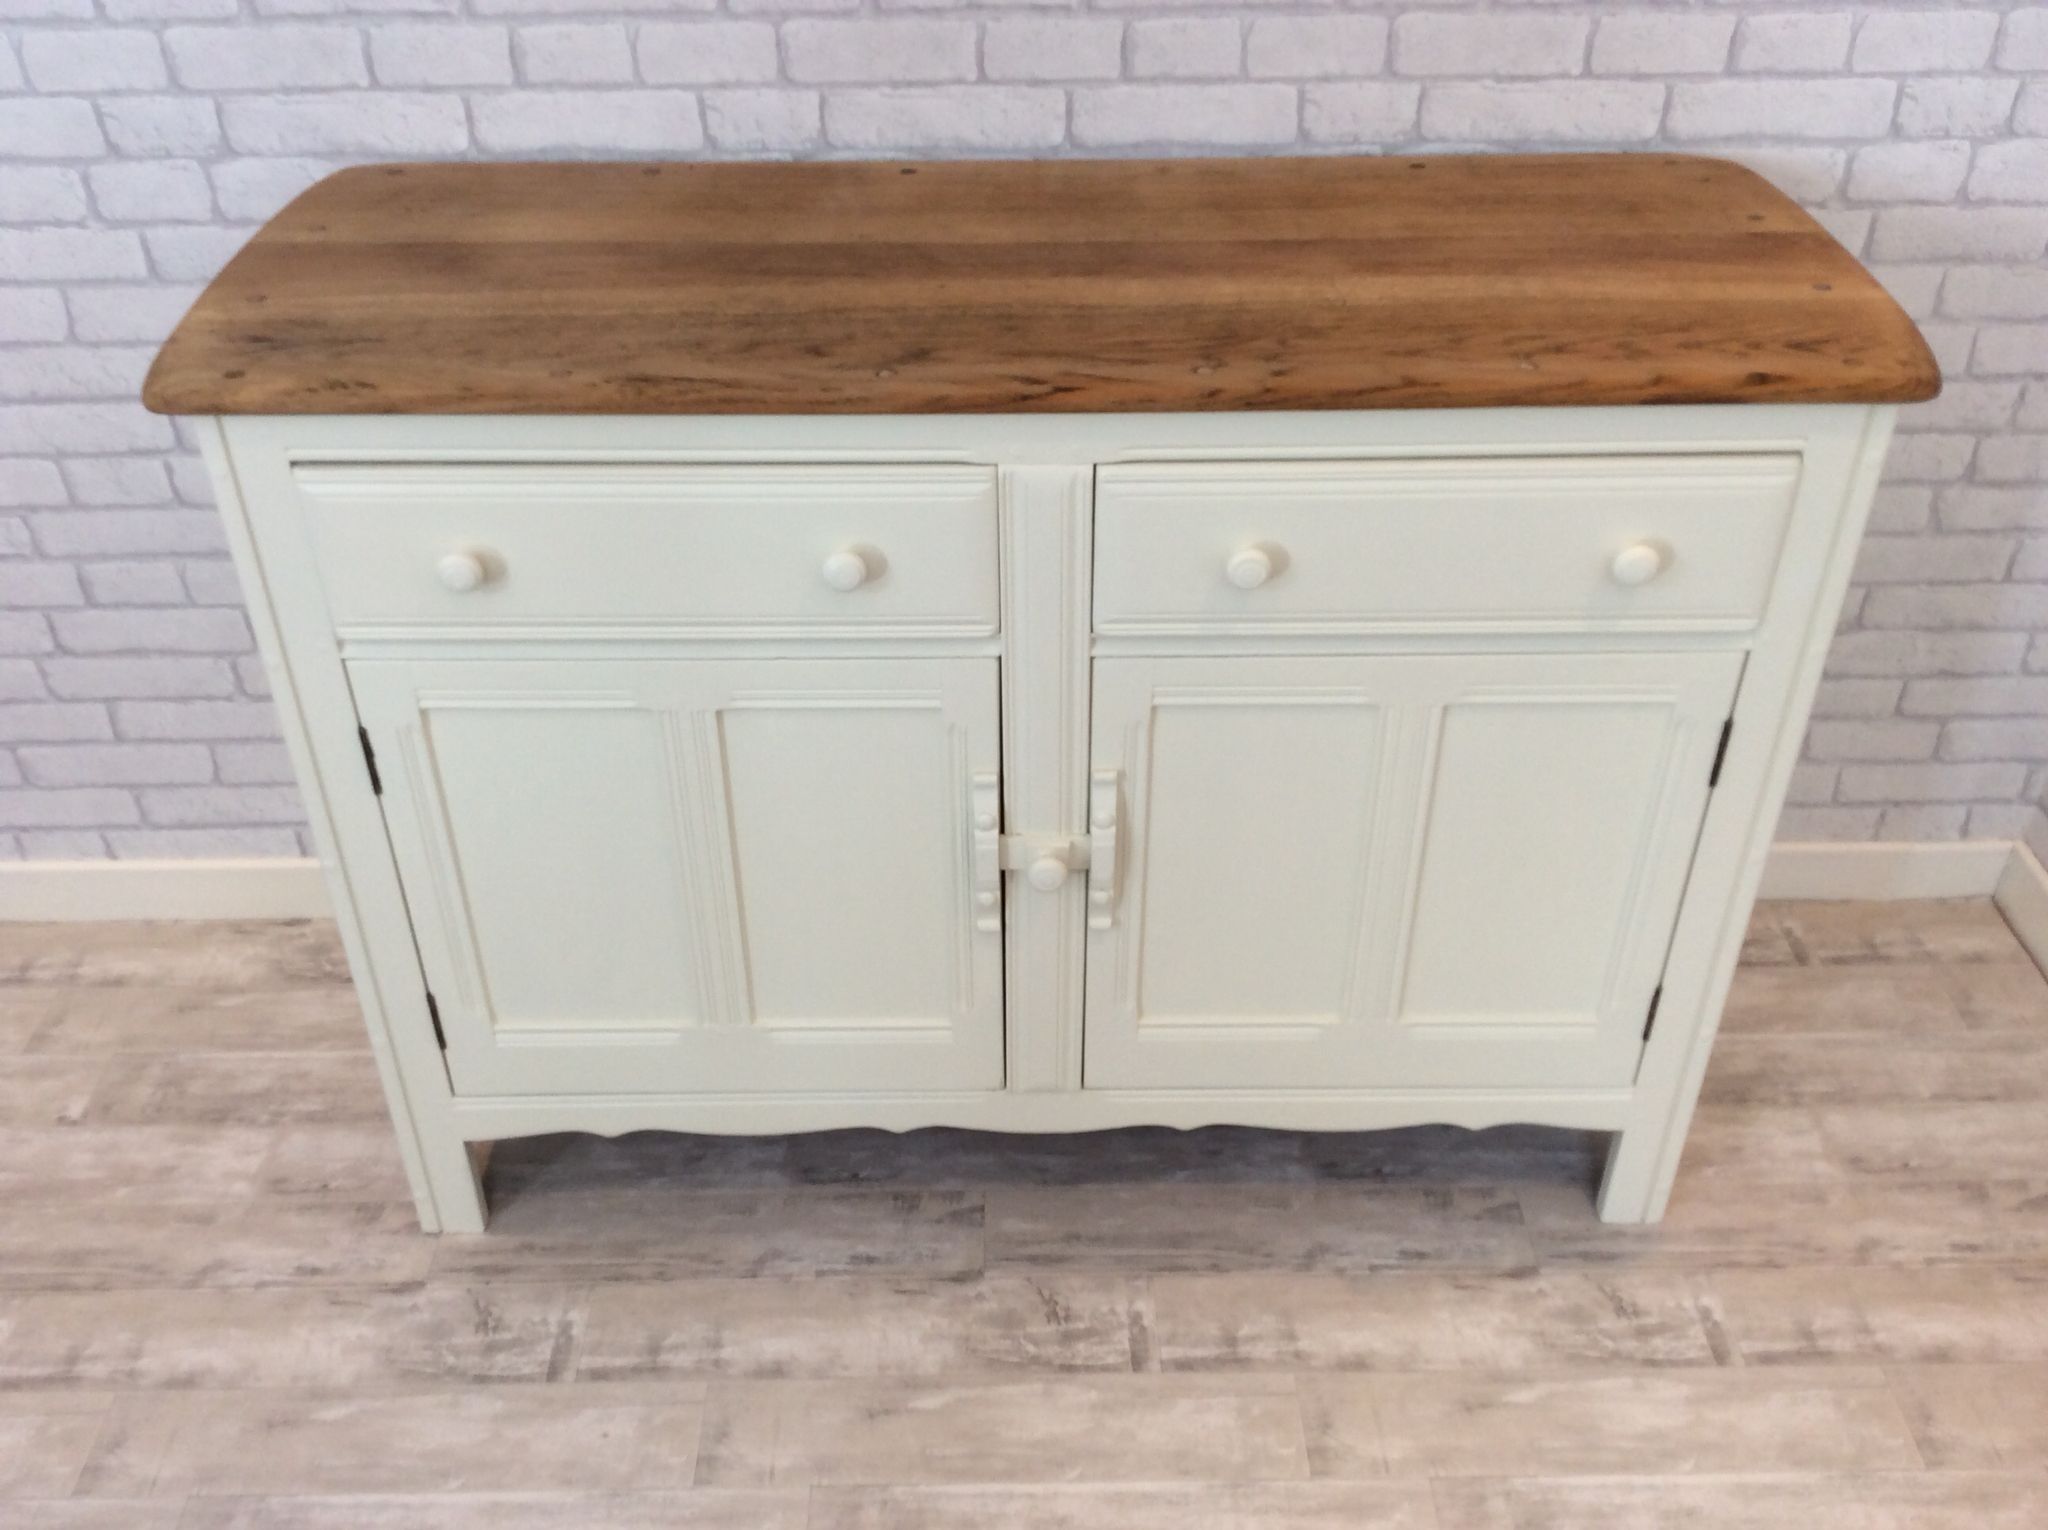 Original Ercol Sideboard, Stripped And Painted – Looking Good! | My In Reclaimed Elm 91 Inch Sideboards (View 17 of 30)